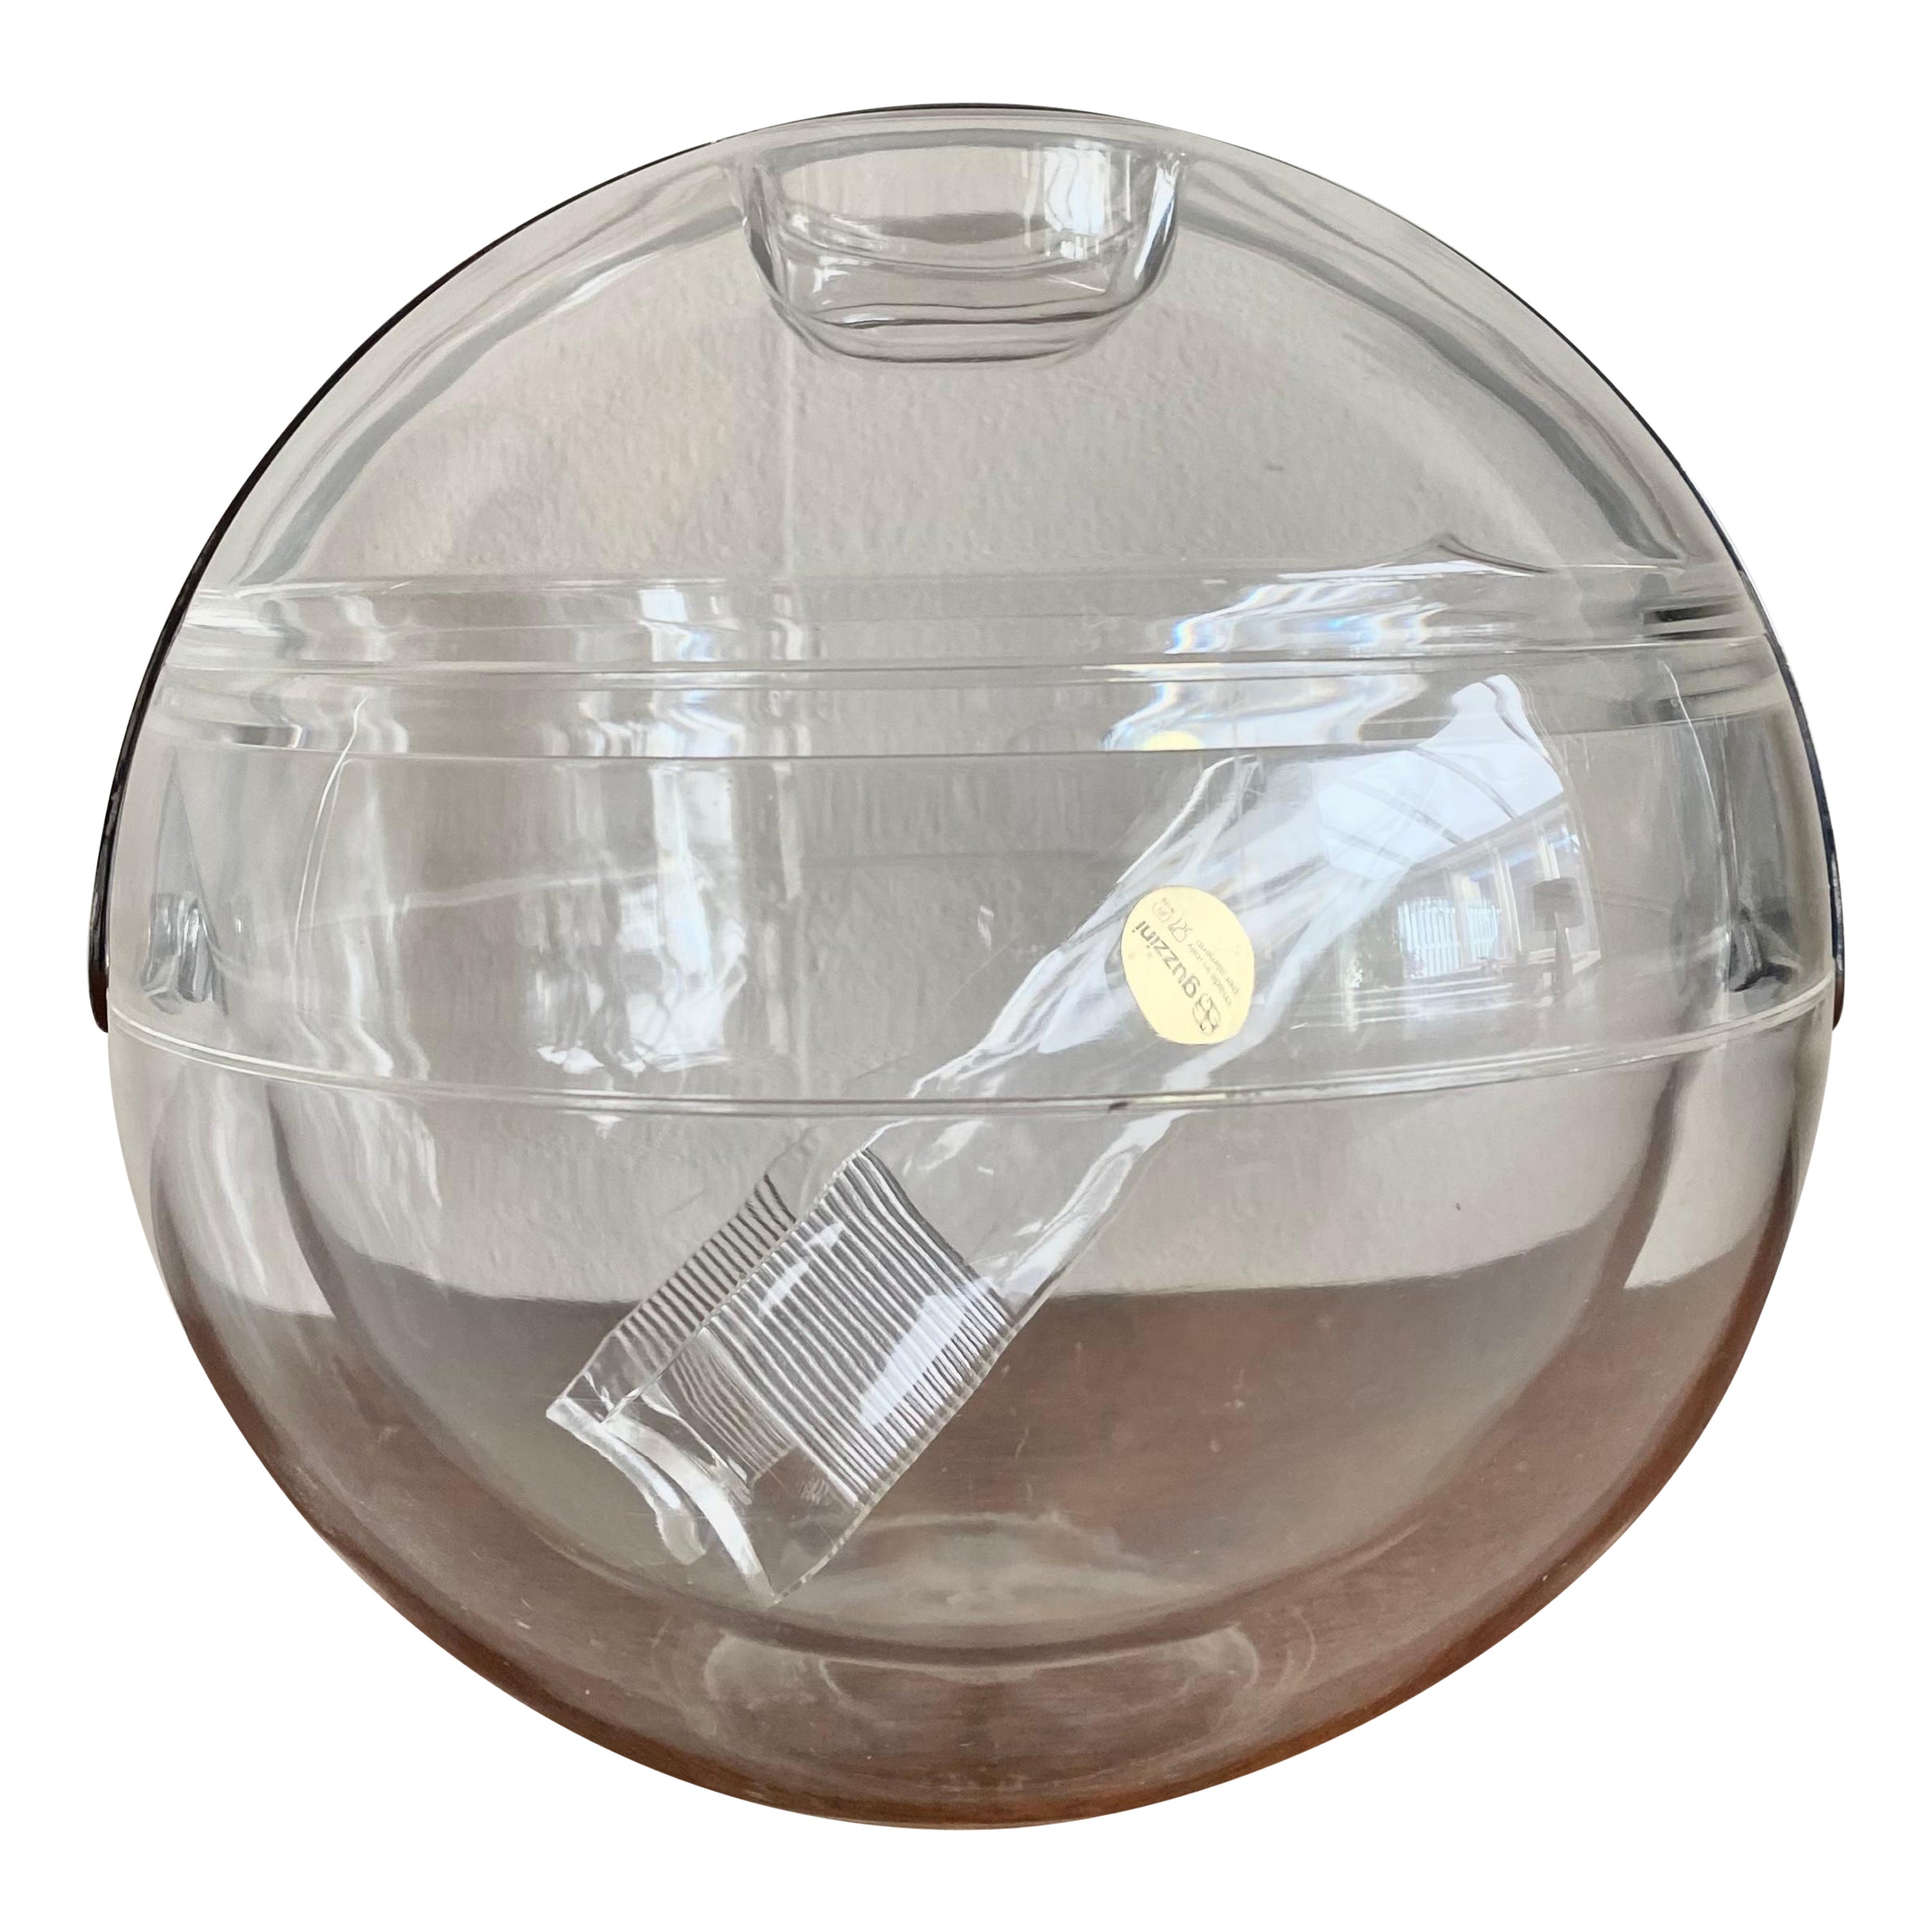 Lucite Space Age Icebucket Model Stella by Paolo Tilche for Guzzini, 1970s For Sale